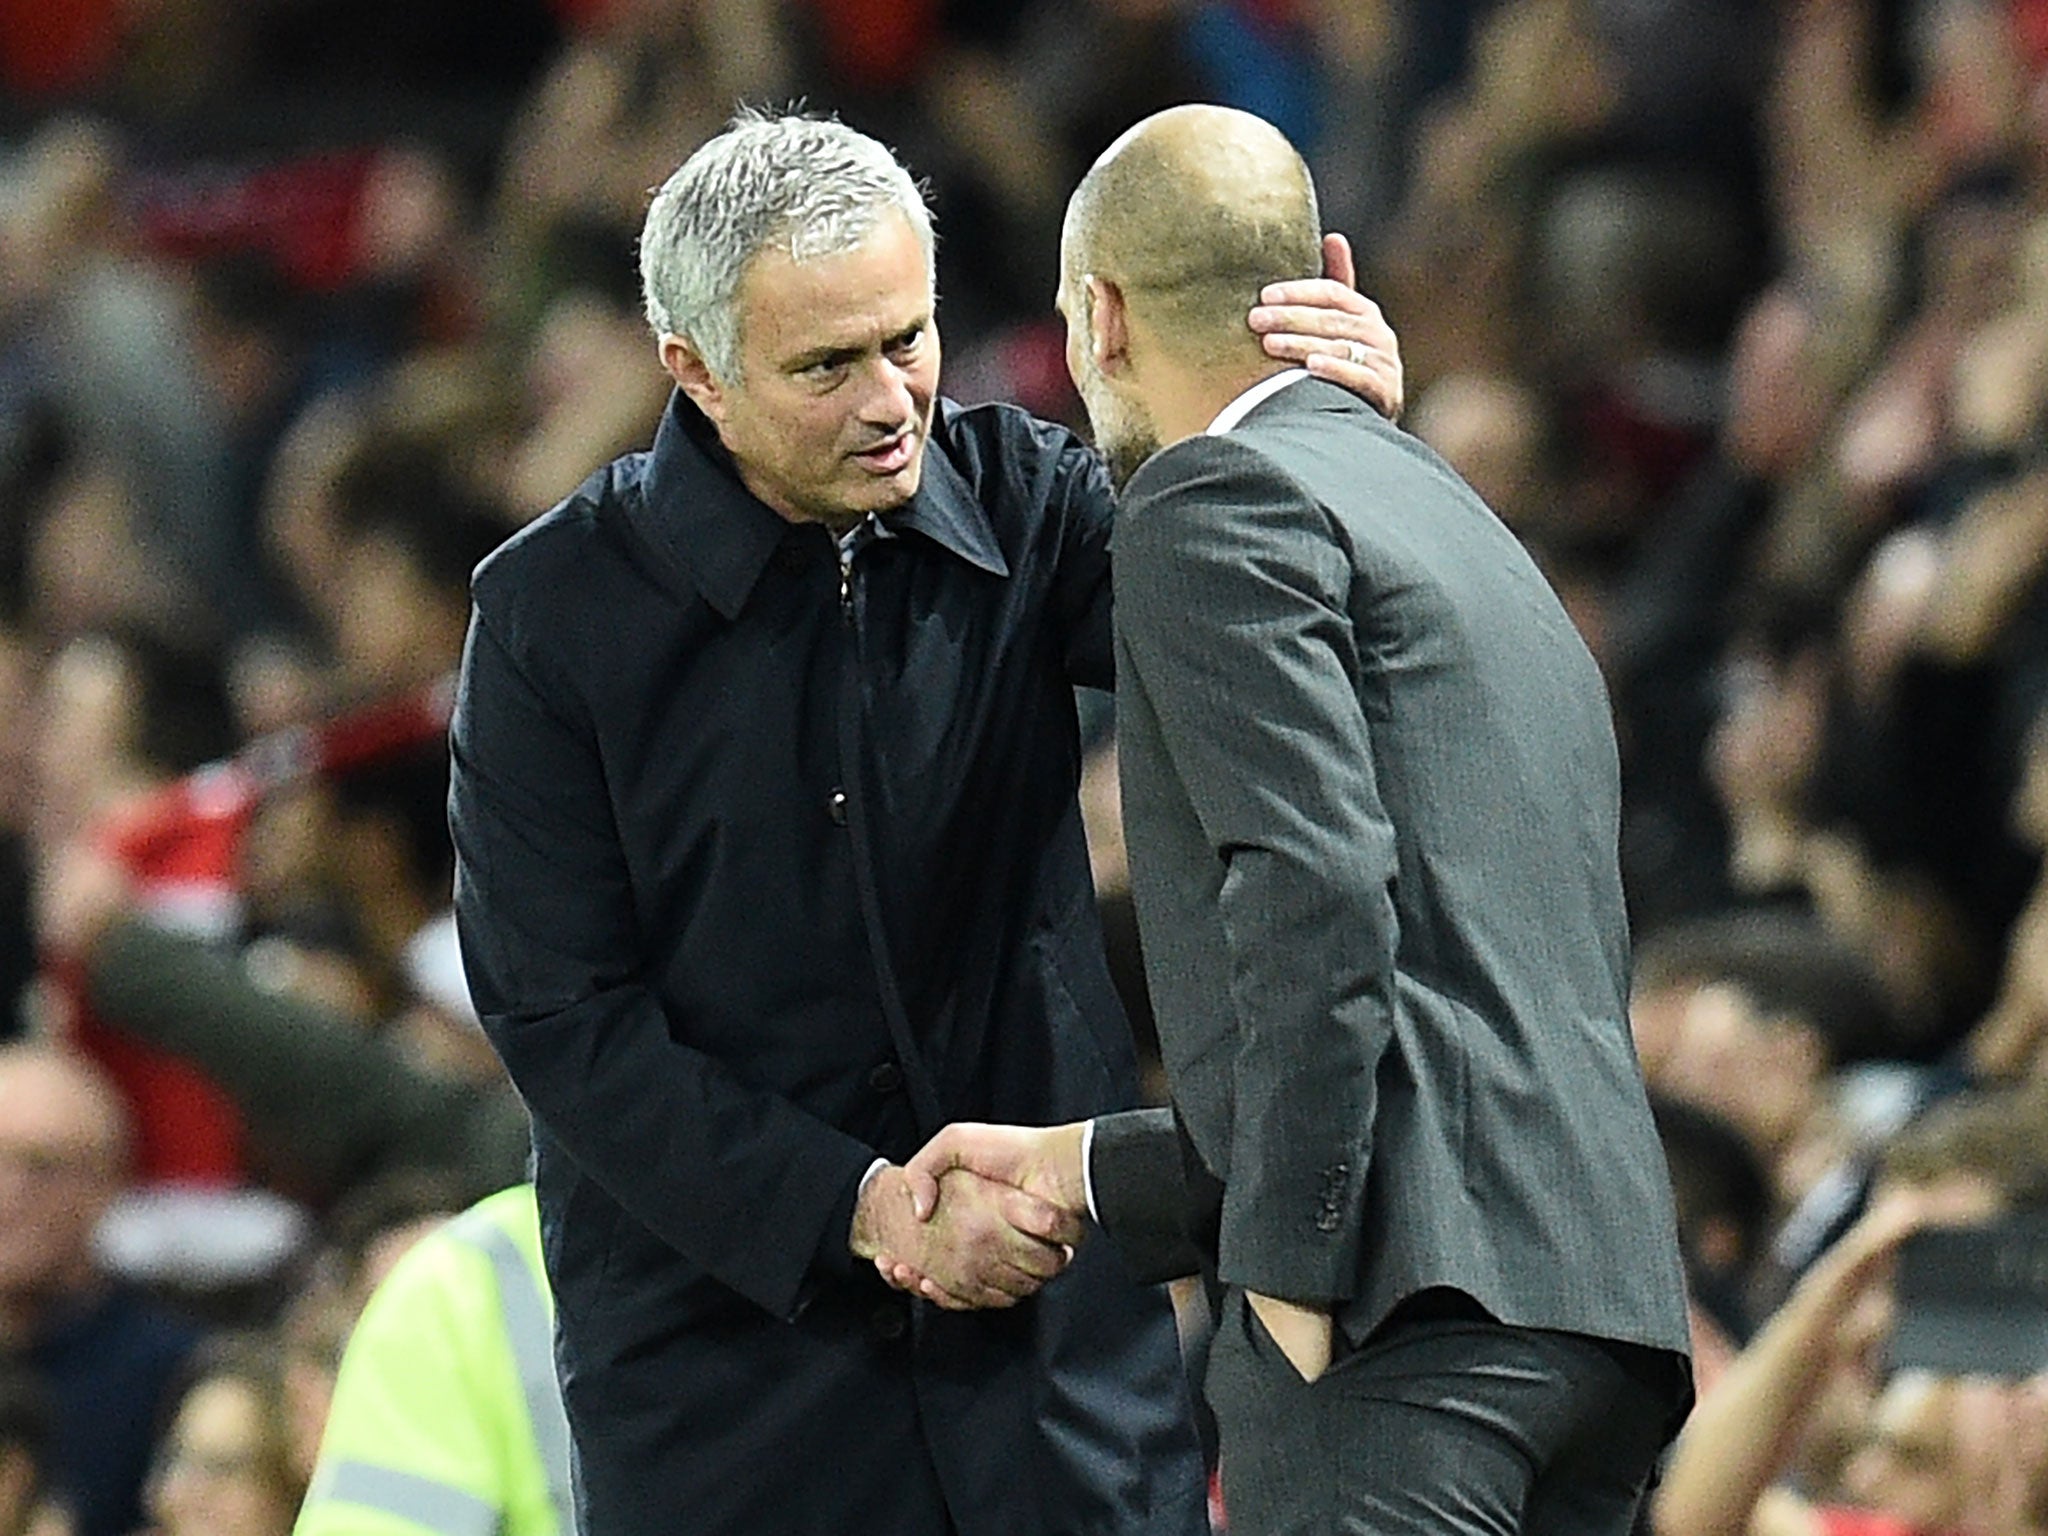 Jose Mourinho could suffer the first league double-defeat of his career against Manchester City